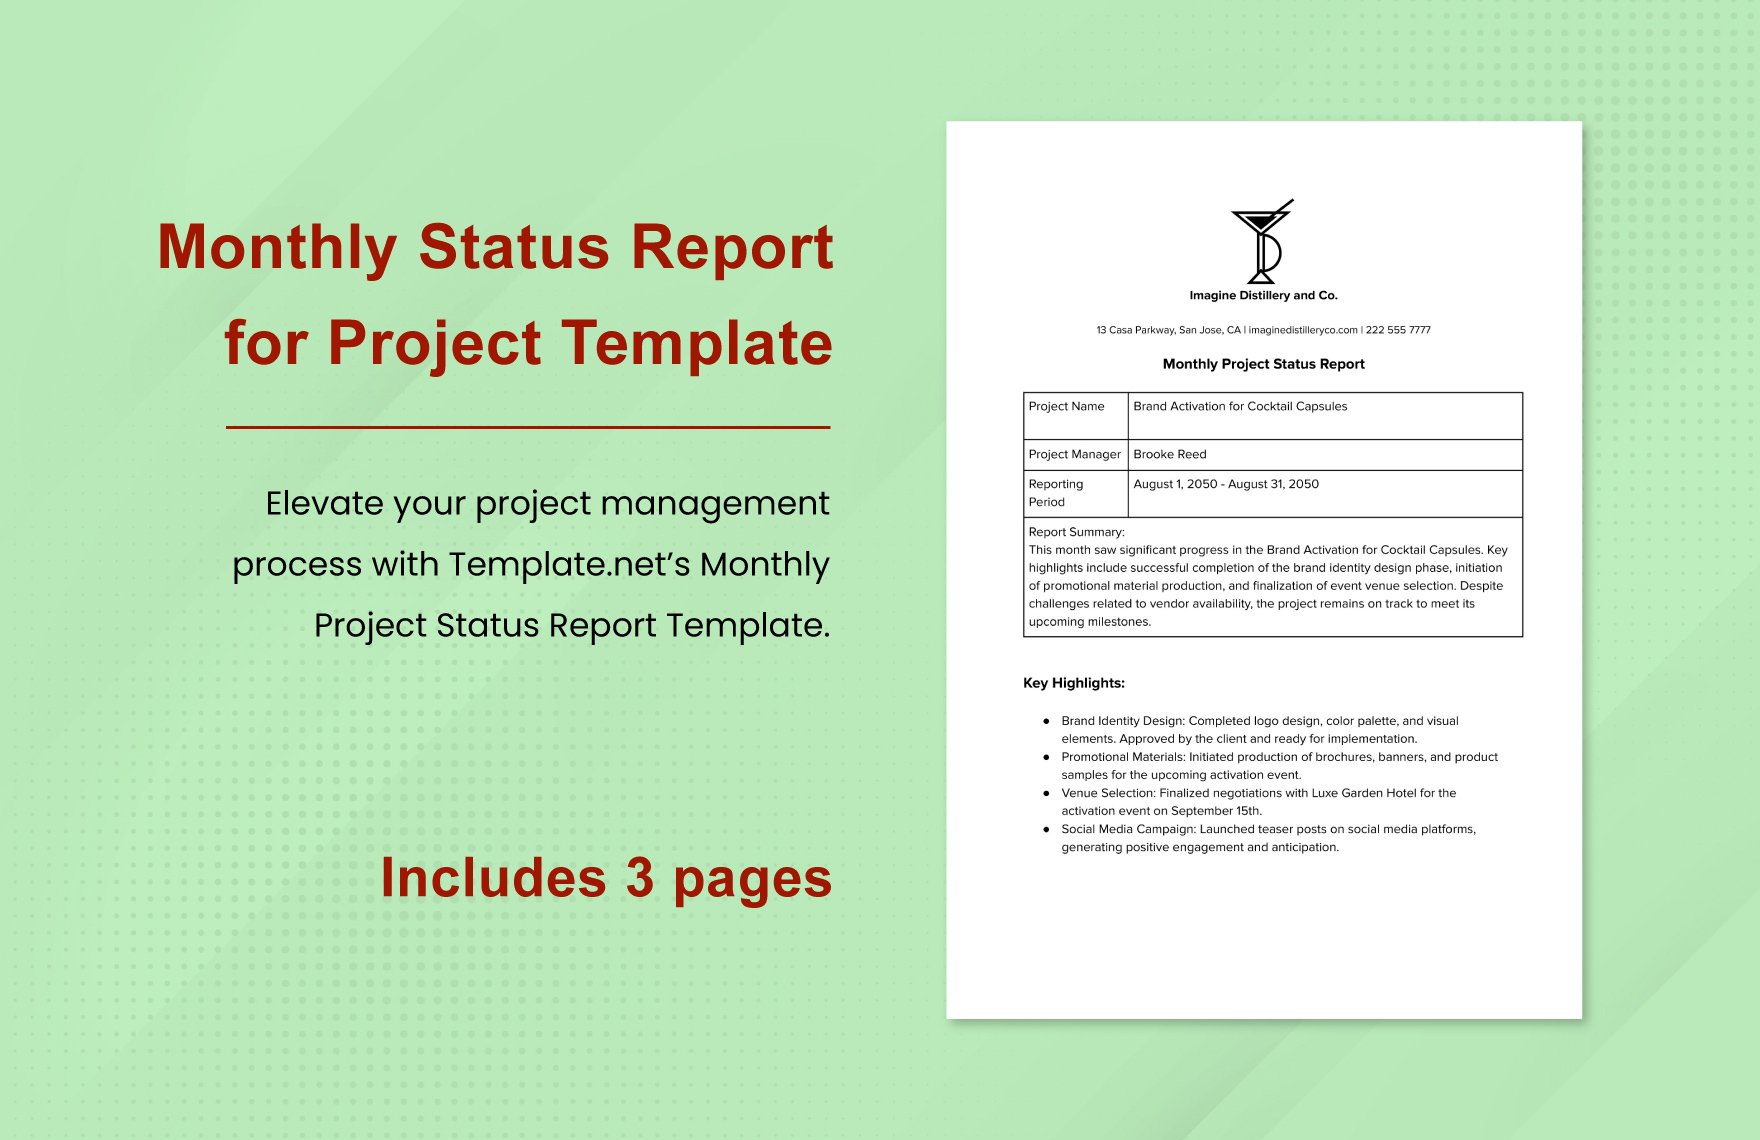 Monthly Status Report for Project Template